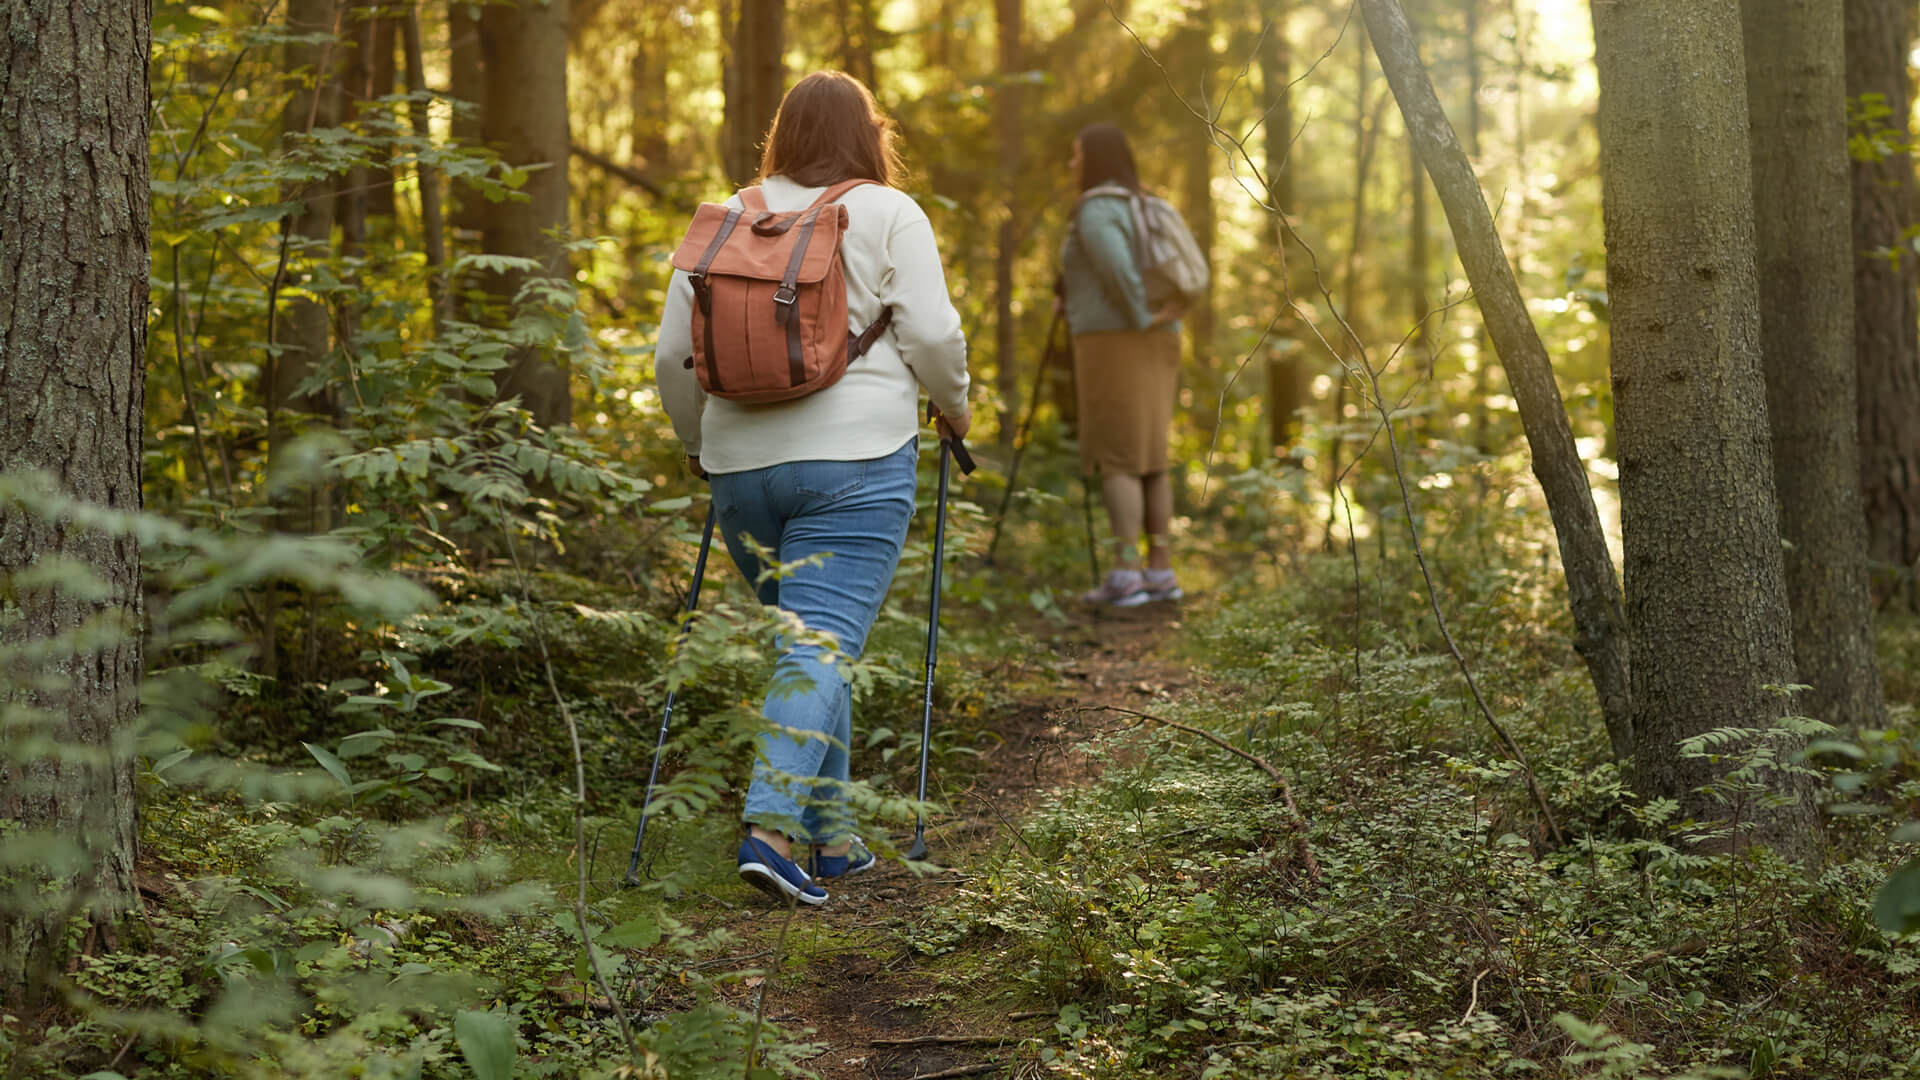 Two hikers with backpacks trekking through a lush forest.